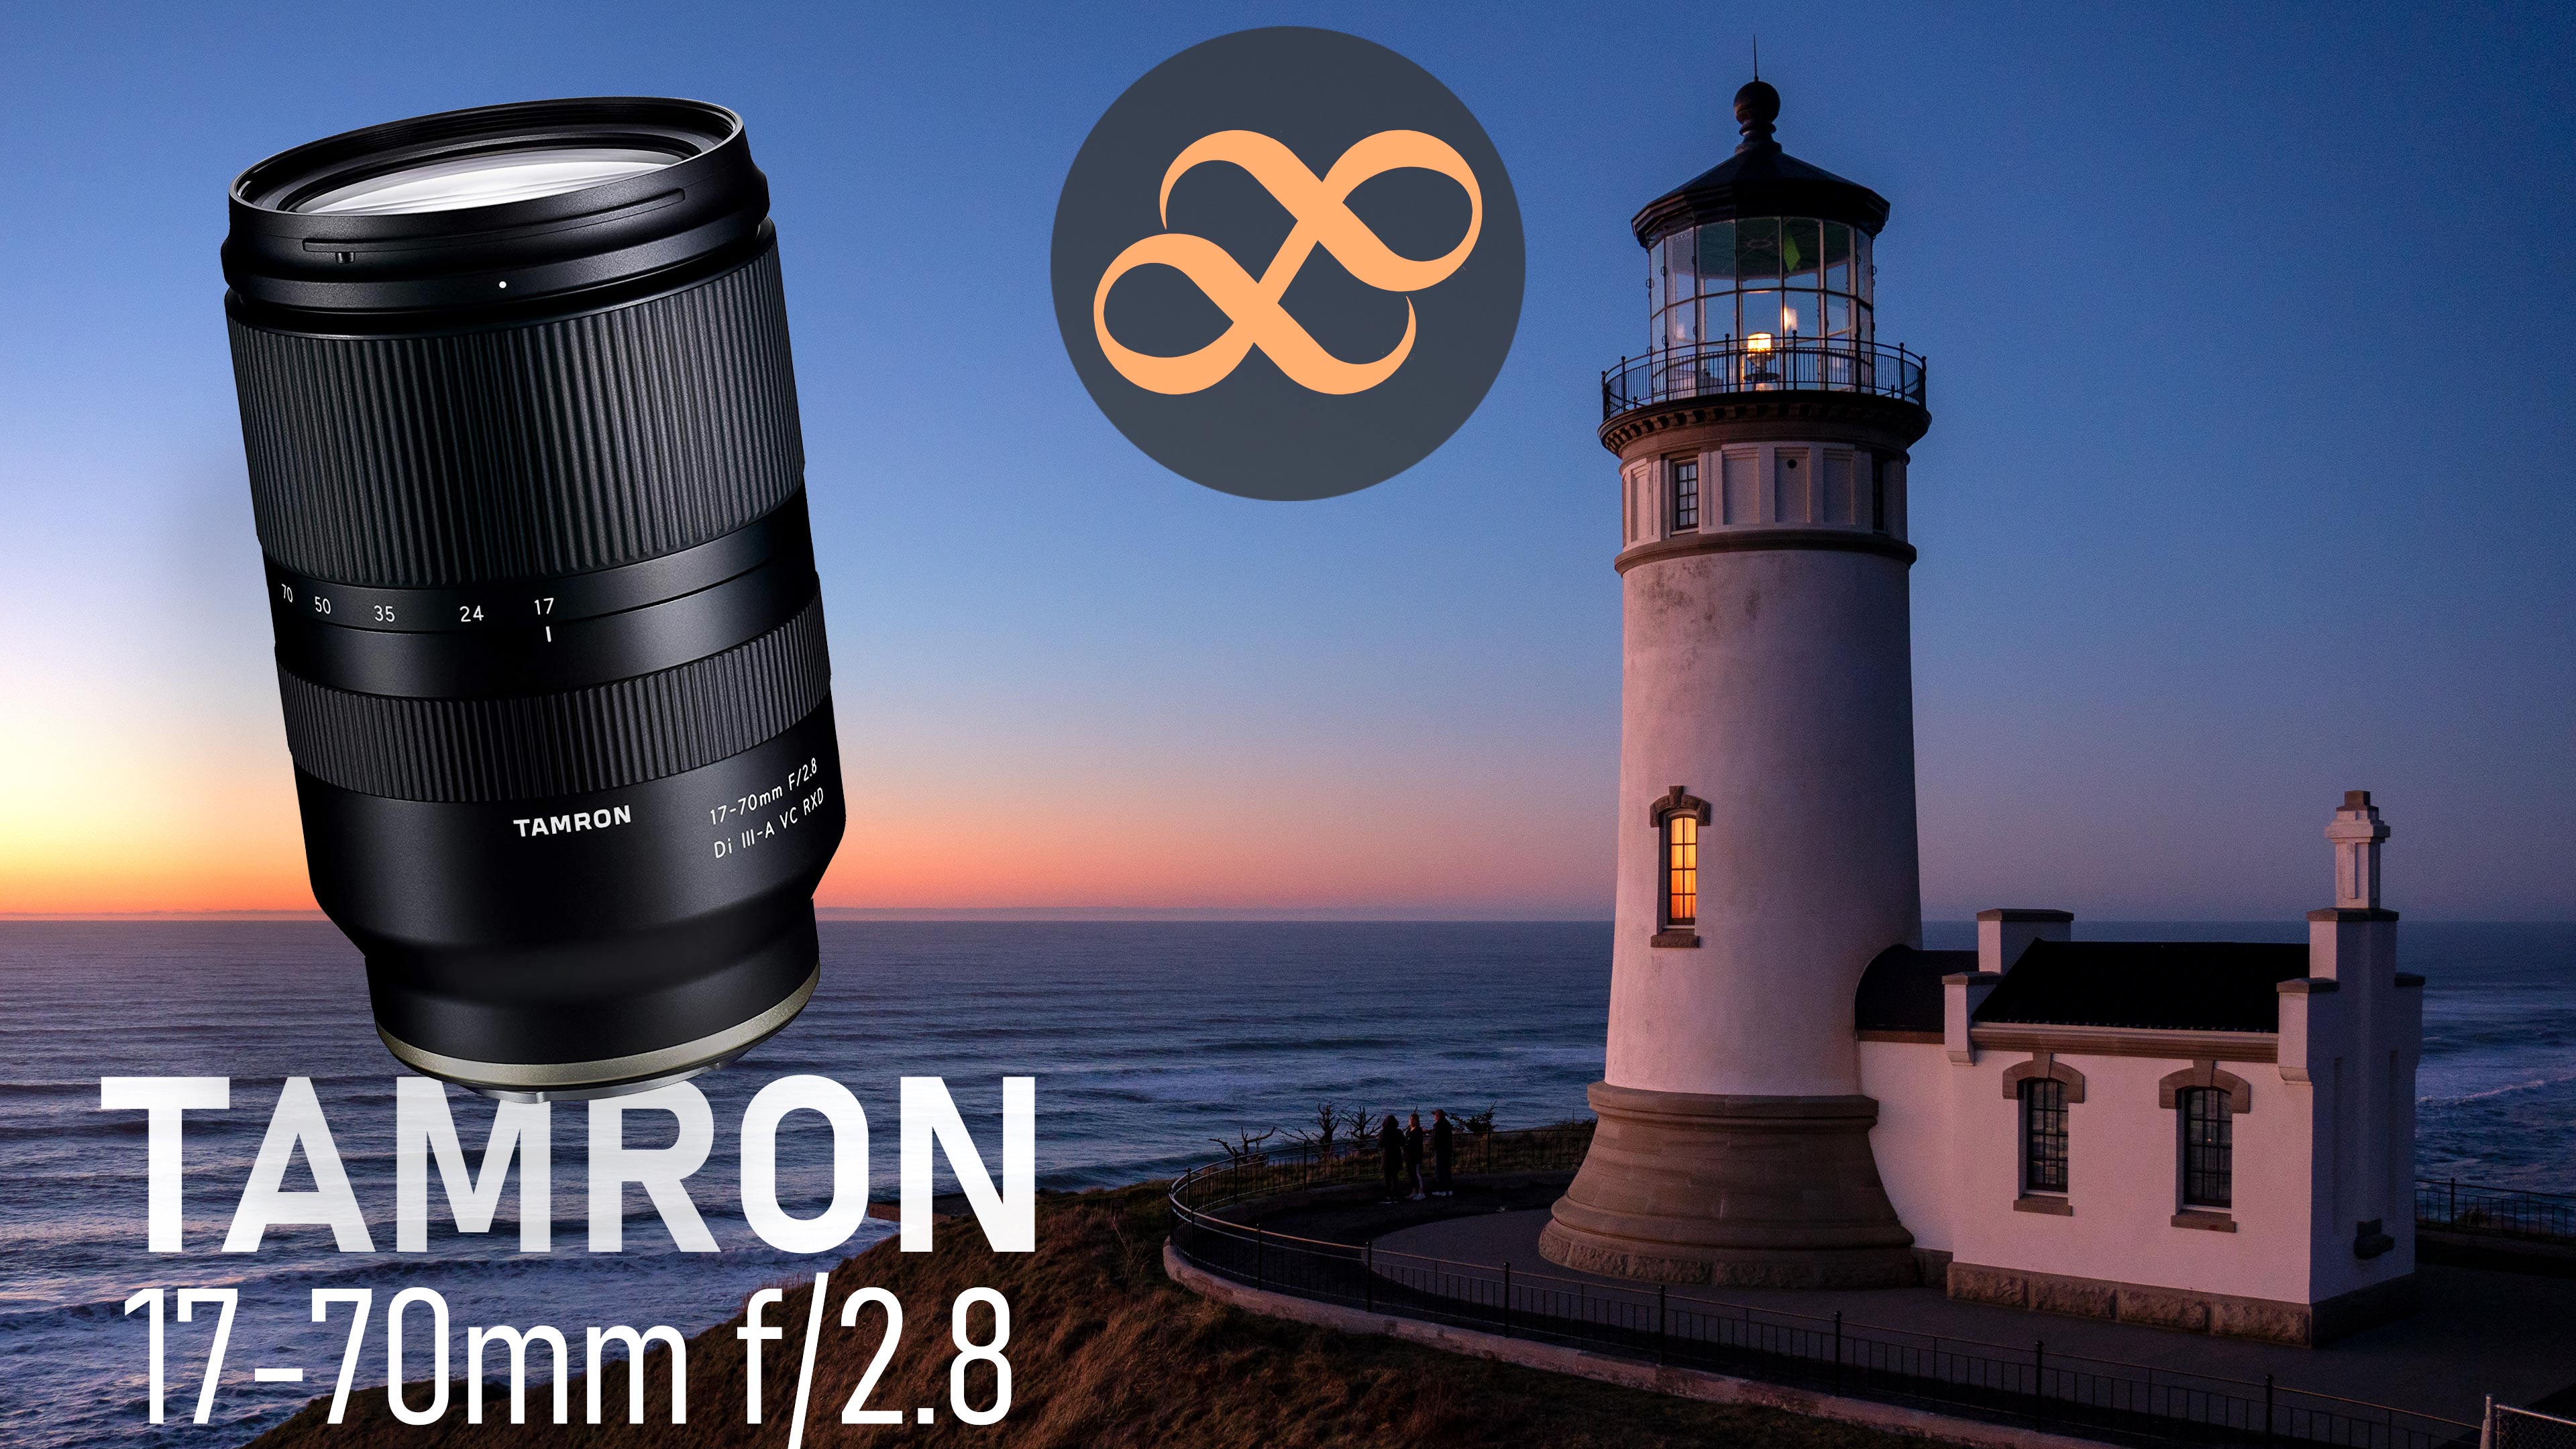 Tamron 17-70mm f/2.8 Versus Sony 16-55mm f/2.8 G: Which Is the Better Lens  for Sony APS-C Cameras?